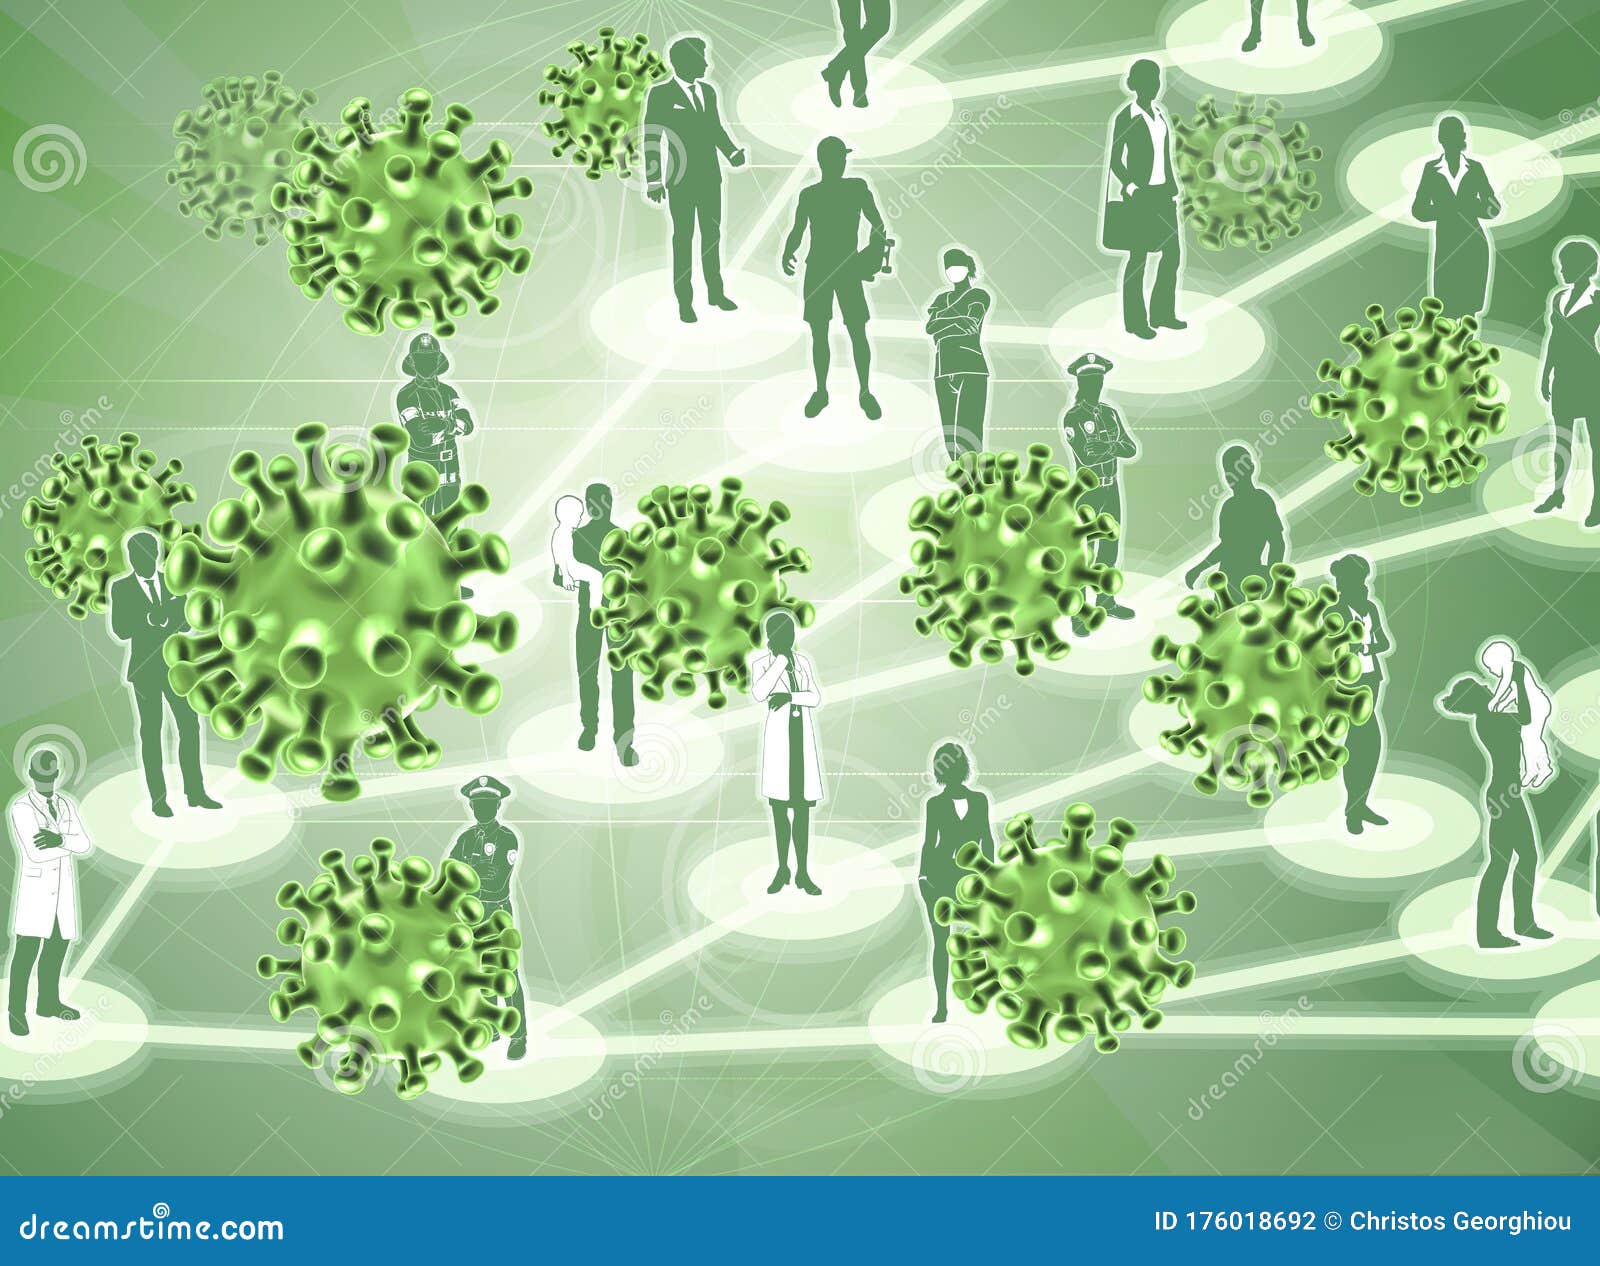 virus cells viral spread pandemic people concept